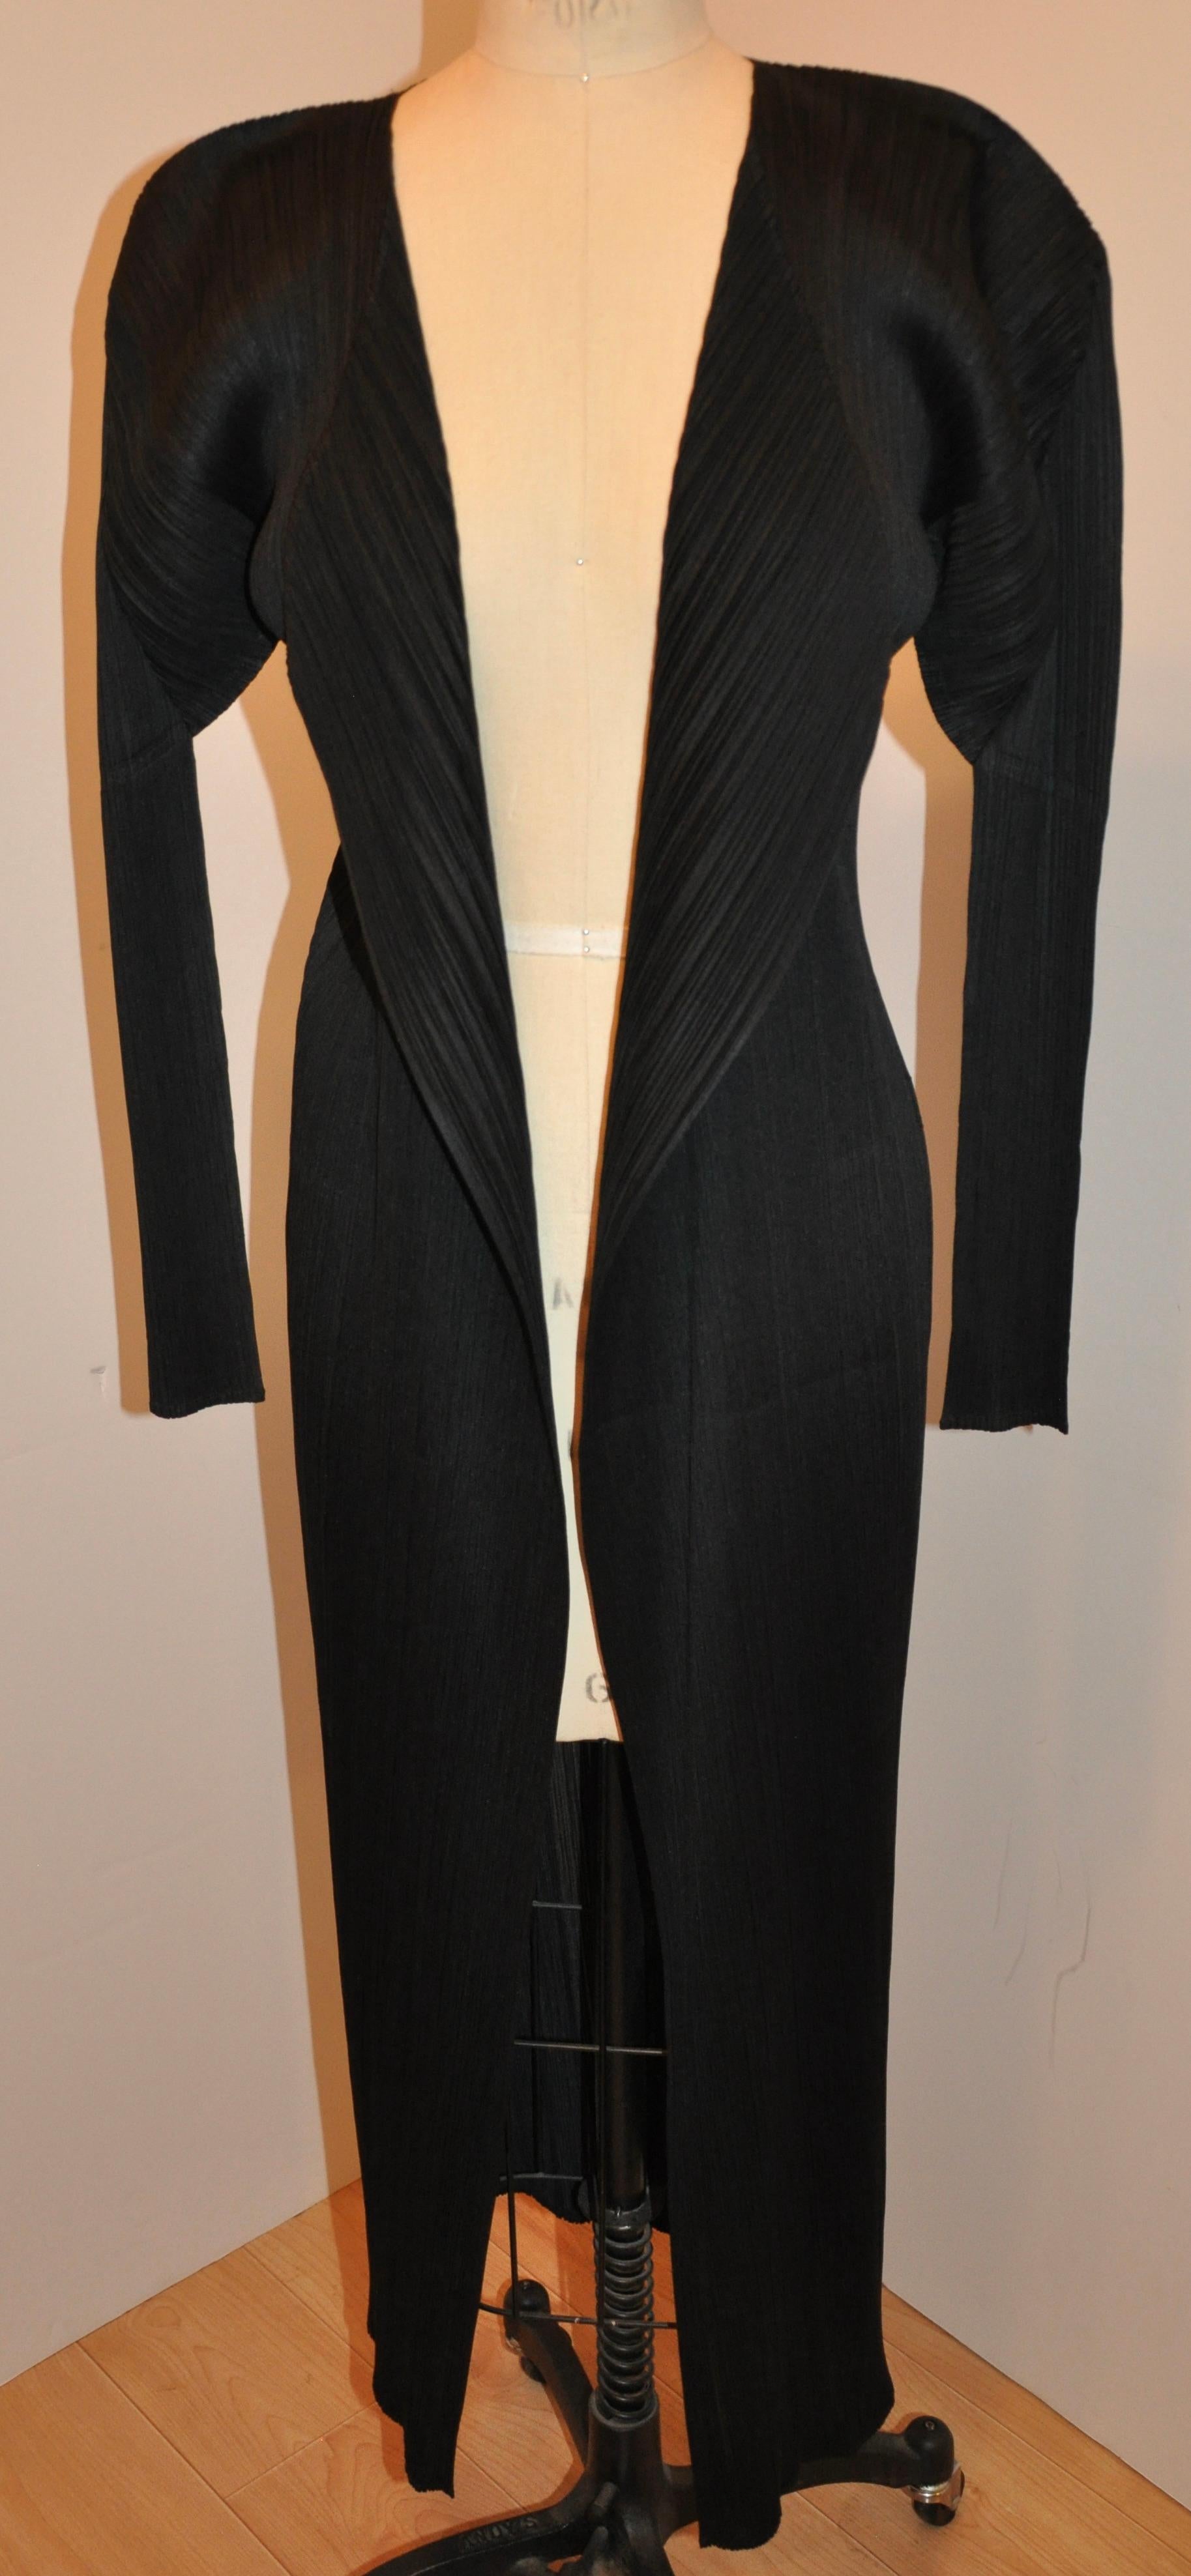 Issey Miyake Wonderful Iconic Signature Jet Black Open Coat In Good Condition For Sale In New York, NY